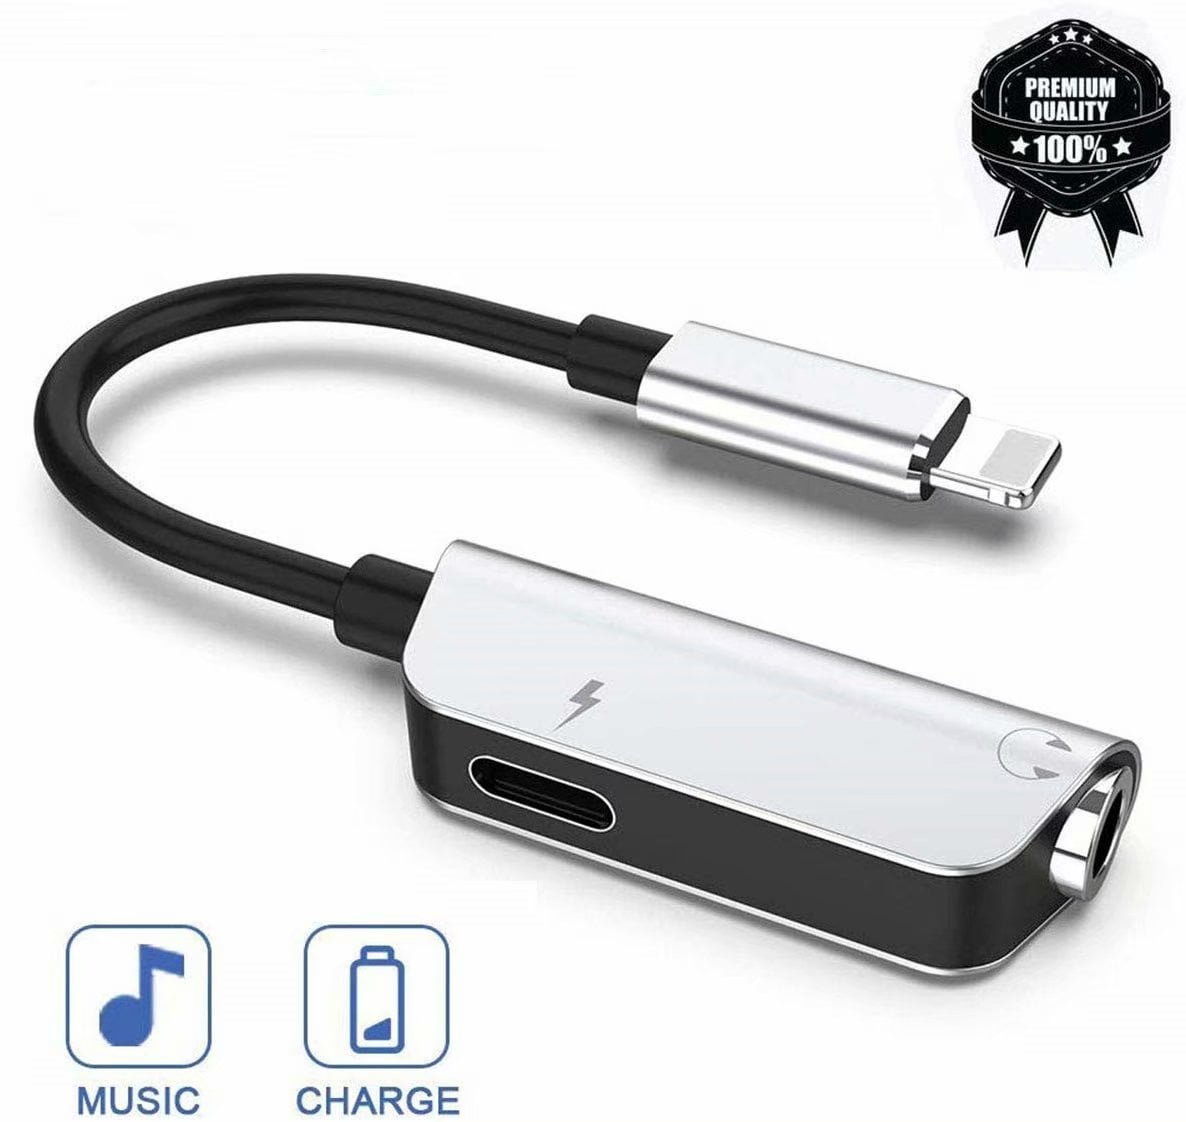 Headphone Adapter For Iphone 3 5mm Jack Adaptor 2 In 1 Charging Cable For Iphone 7plus 8 8plus X Xr Xs Earphone Aux Car Charge Adapter Splitter Audio Connector Walmart Com Walmart Com